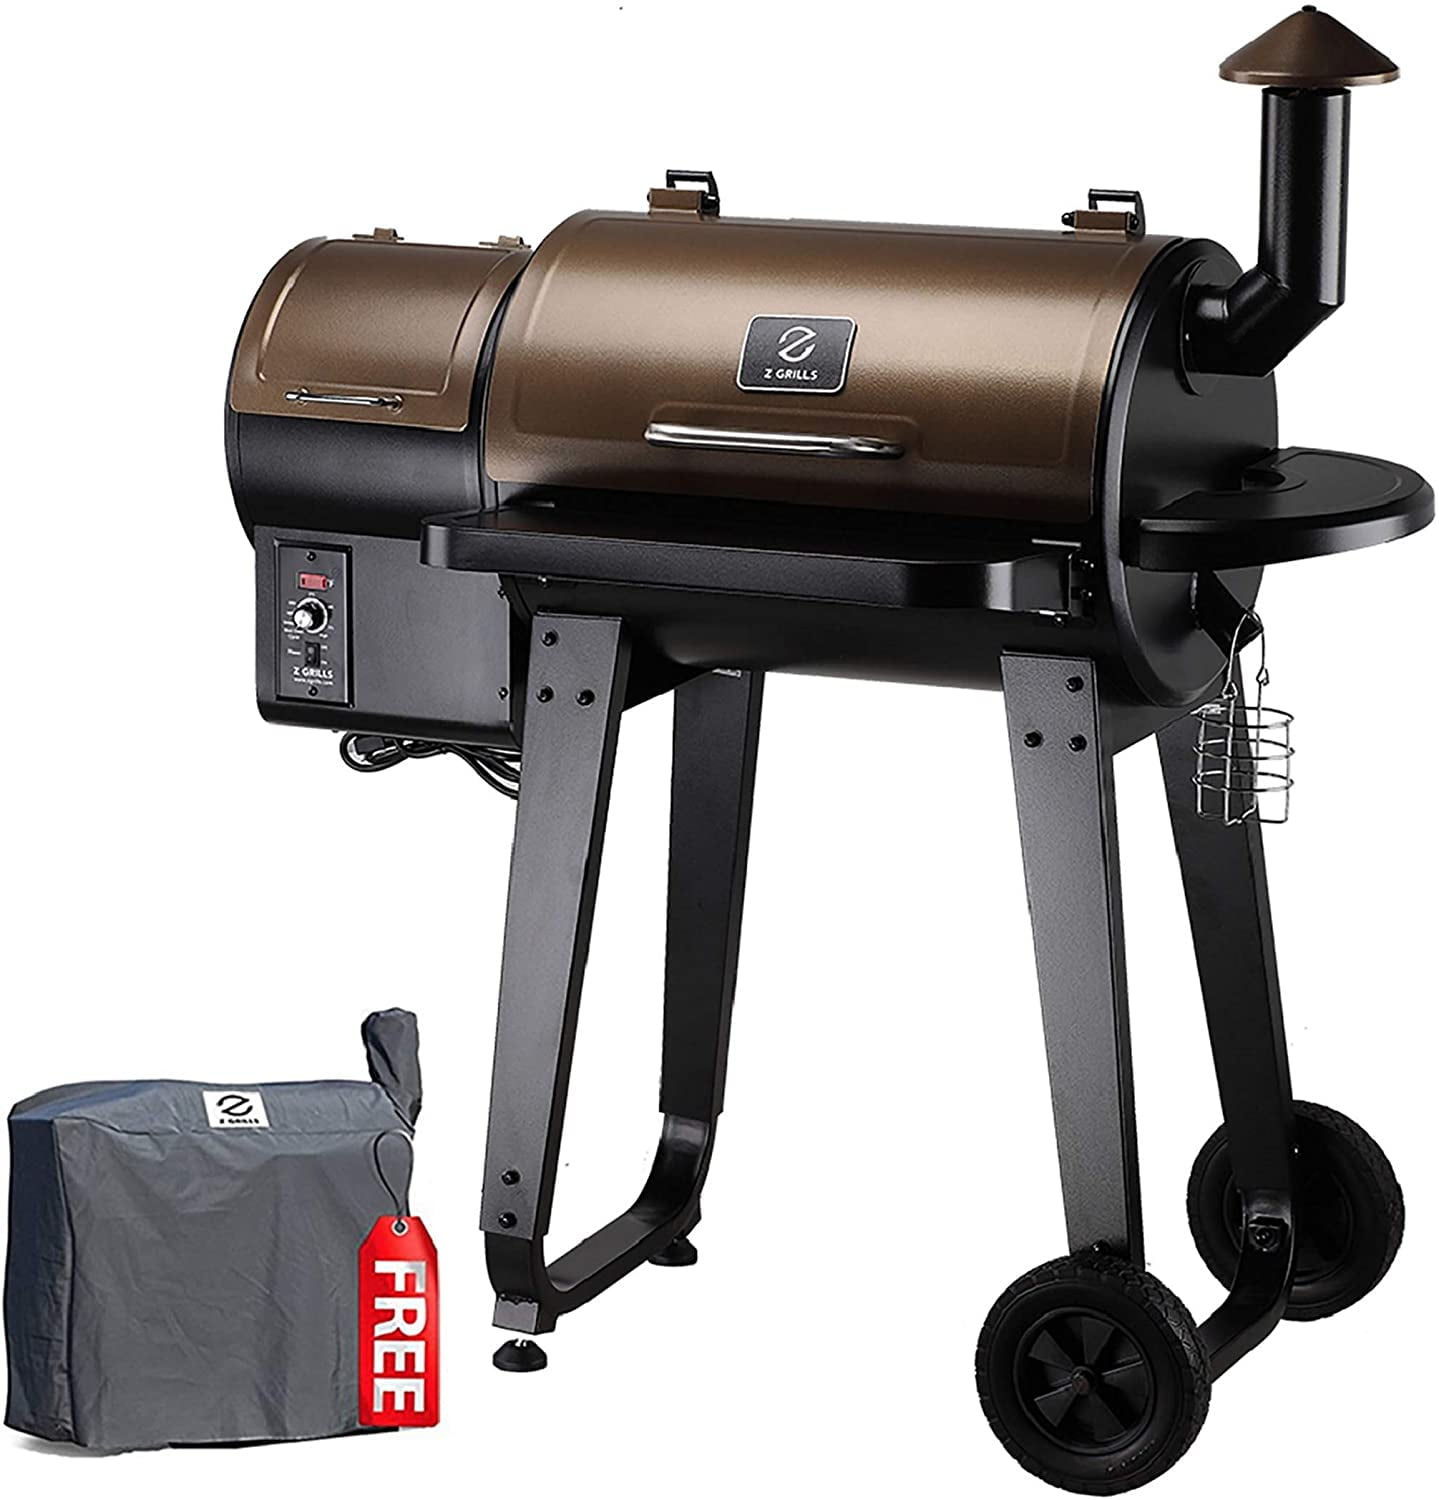 Z GRILLS ZPG-10002E 1060 sq in Pellet Grill and Smoker Stainless